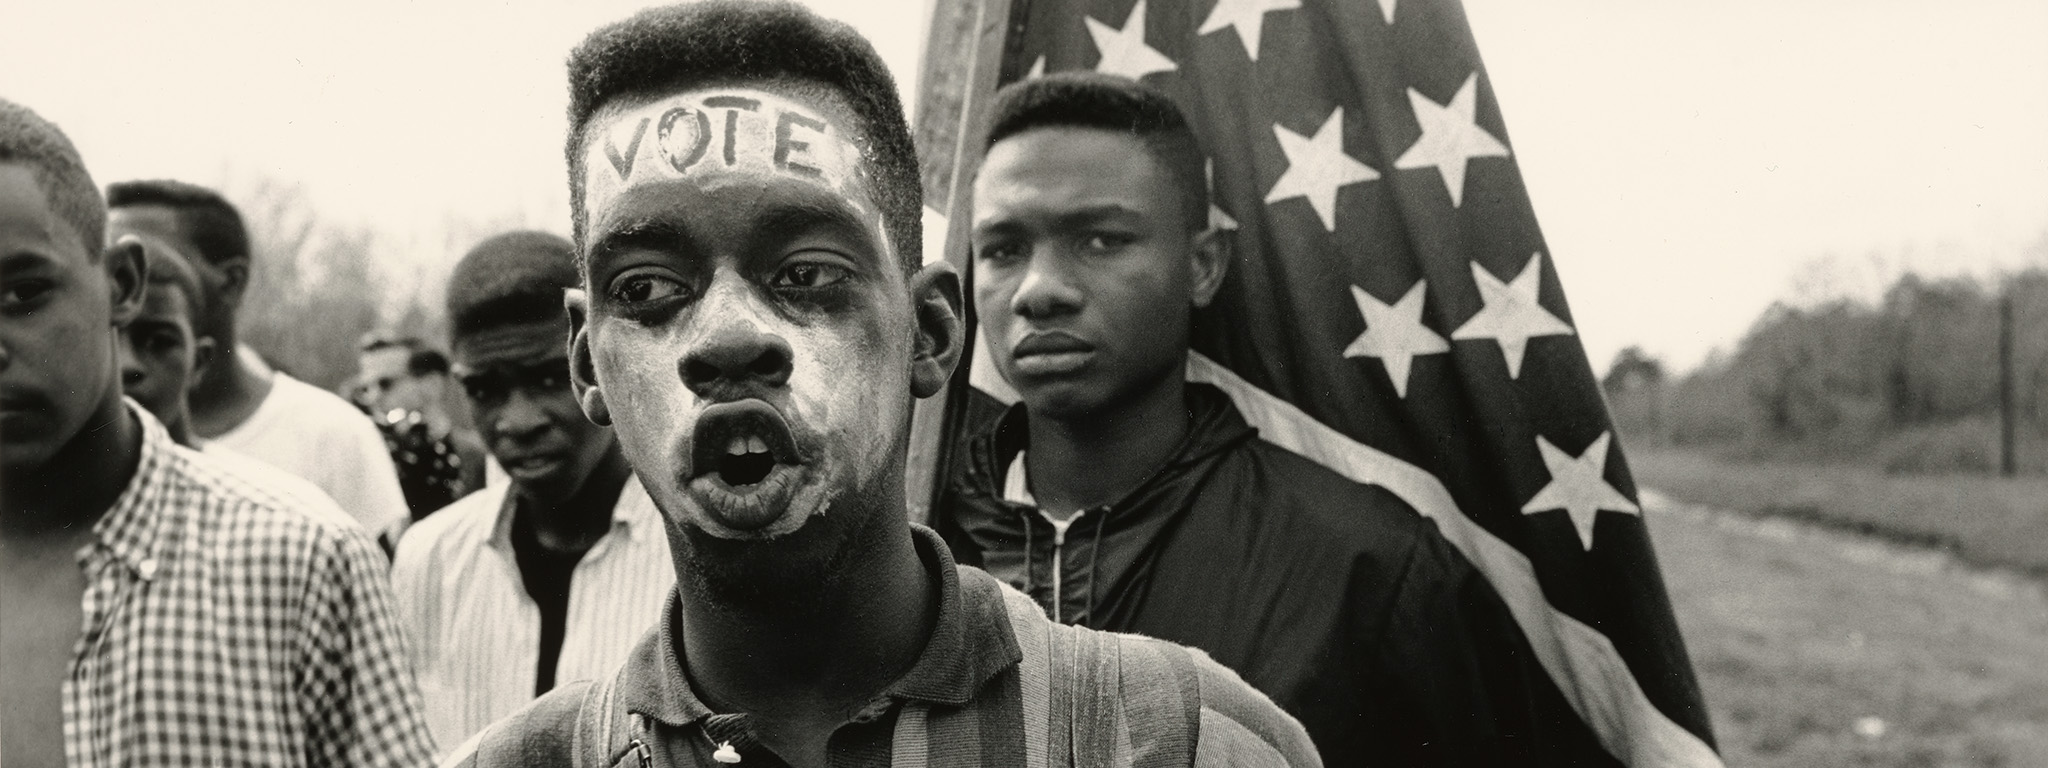 March from Selma, Alabama (detail) from Time of Change, negative 1965; printed later, Bruce Davidson, gelatin silver print. The J. Paul Getty Museum. © Bruce Davidson/Magnum Photos 